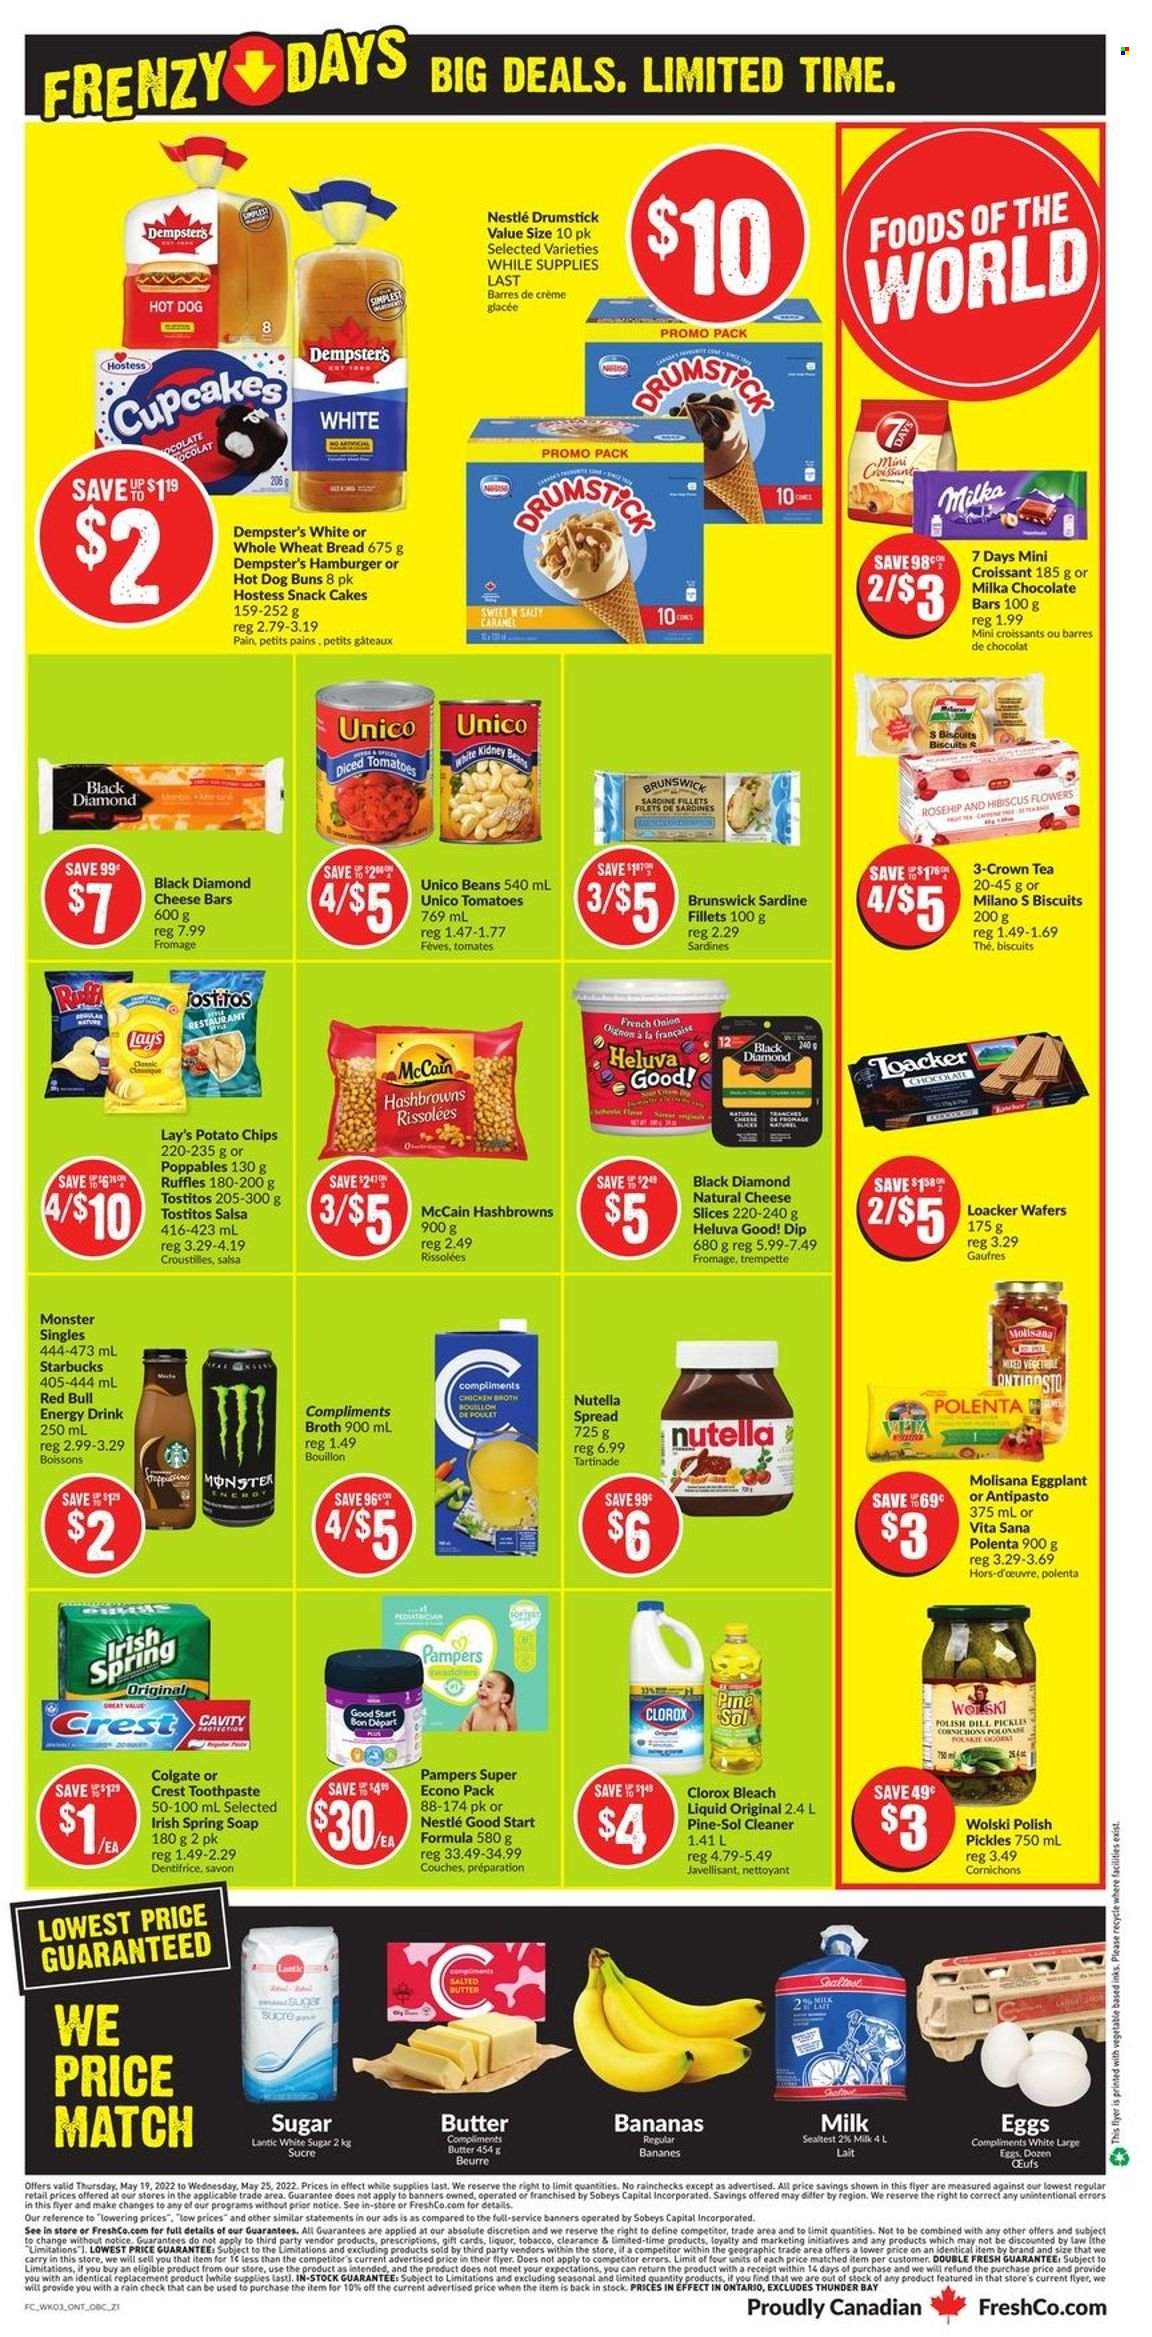 thumbnail - FreshCo. Flyer - May 19, 2022 - May 25, 2022 - Sales products - wheat bread, cake, croissant, buns, cupcake, beans, onion, eggplant, bananas, sardines, sliced cheese, cheese, milk, large eggs, butter, dip, McCain, hash browns, wafers, snack, biscuit, 7 Days, chocolate bar, potato chips, chips, Lay’s, Ruffles, Tostitos, bouillon, sugar, chicken broth, broth, pickles, polenta, dill, salsa, energy drink, Monster, Red Bull, tea, Starbucks, Colgate, Nestlé, Nutella. Page 4.